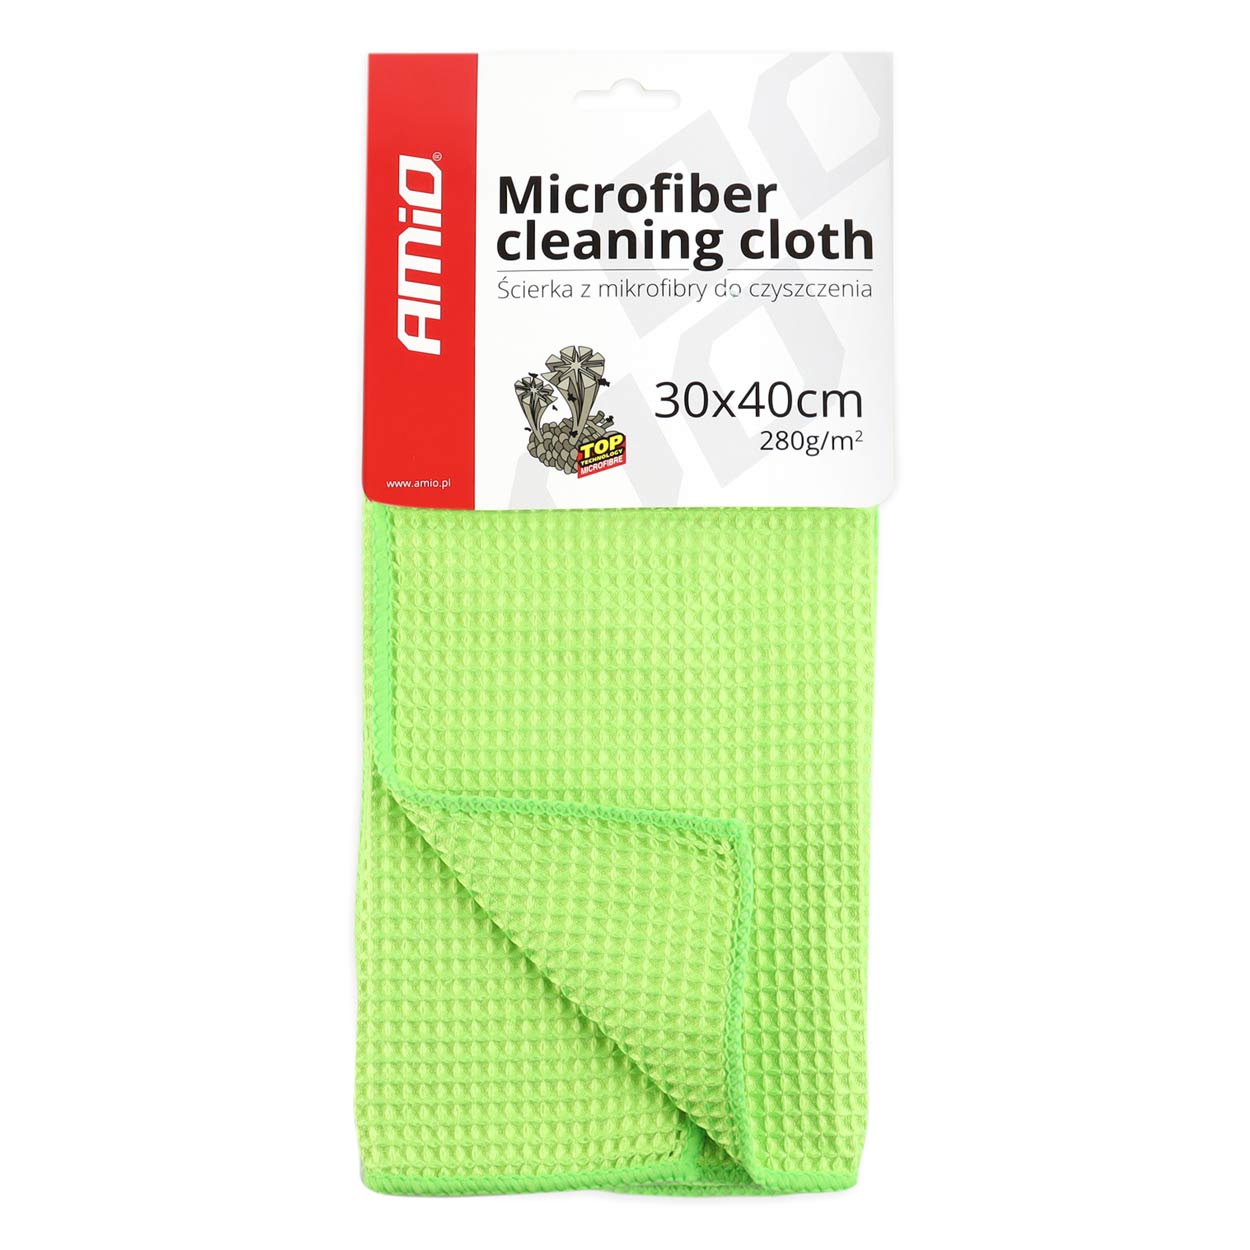 Microfiber cleaning cloth for coarse impurty 30x40cm 280g